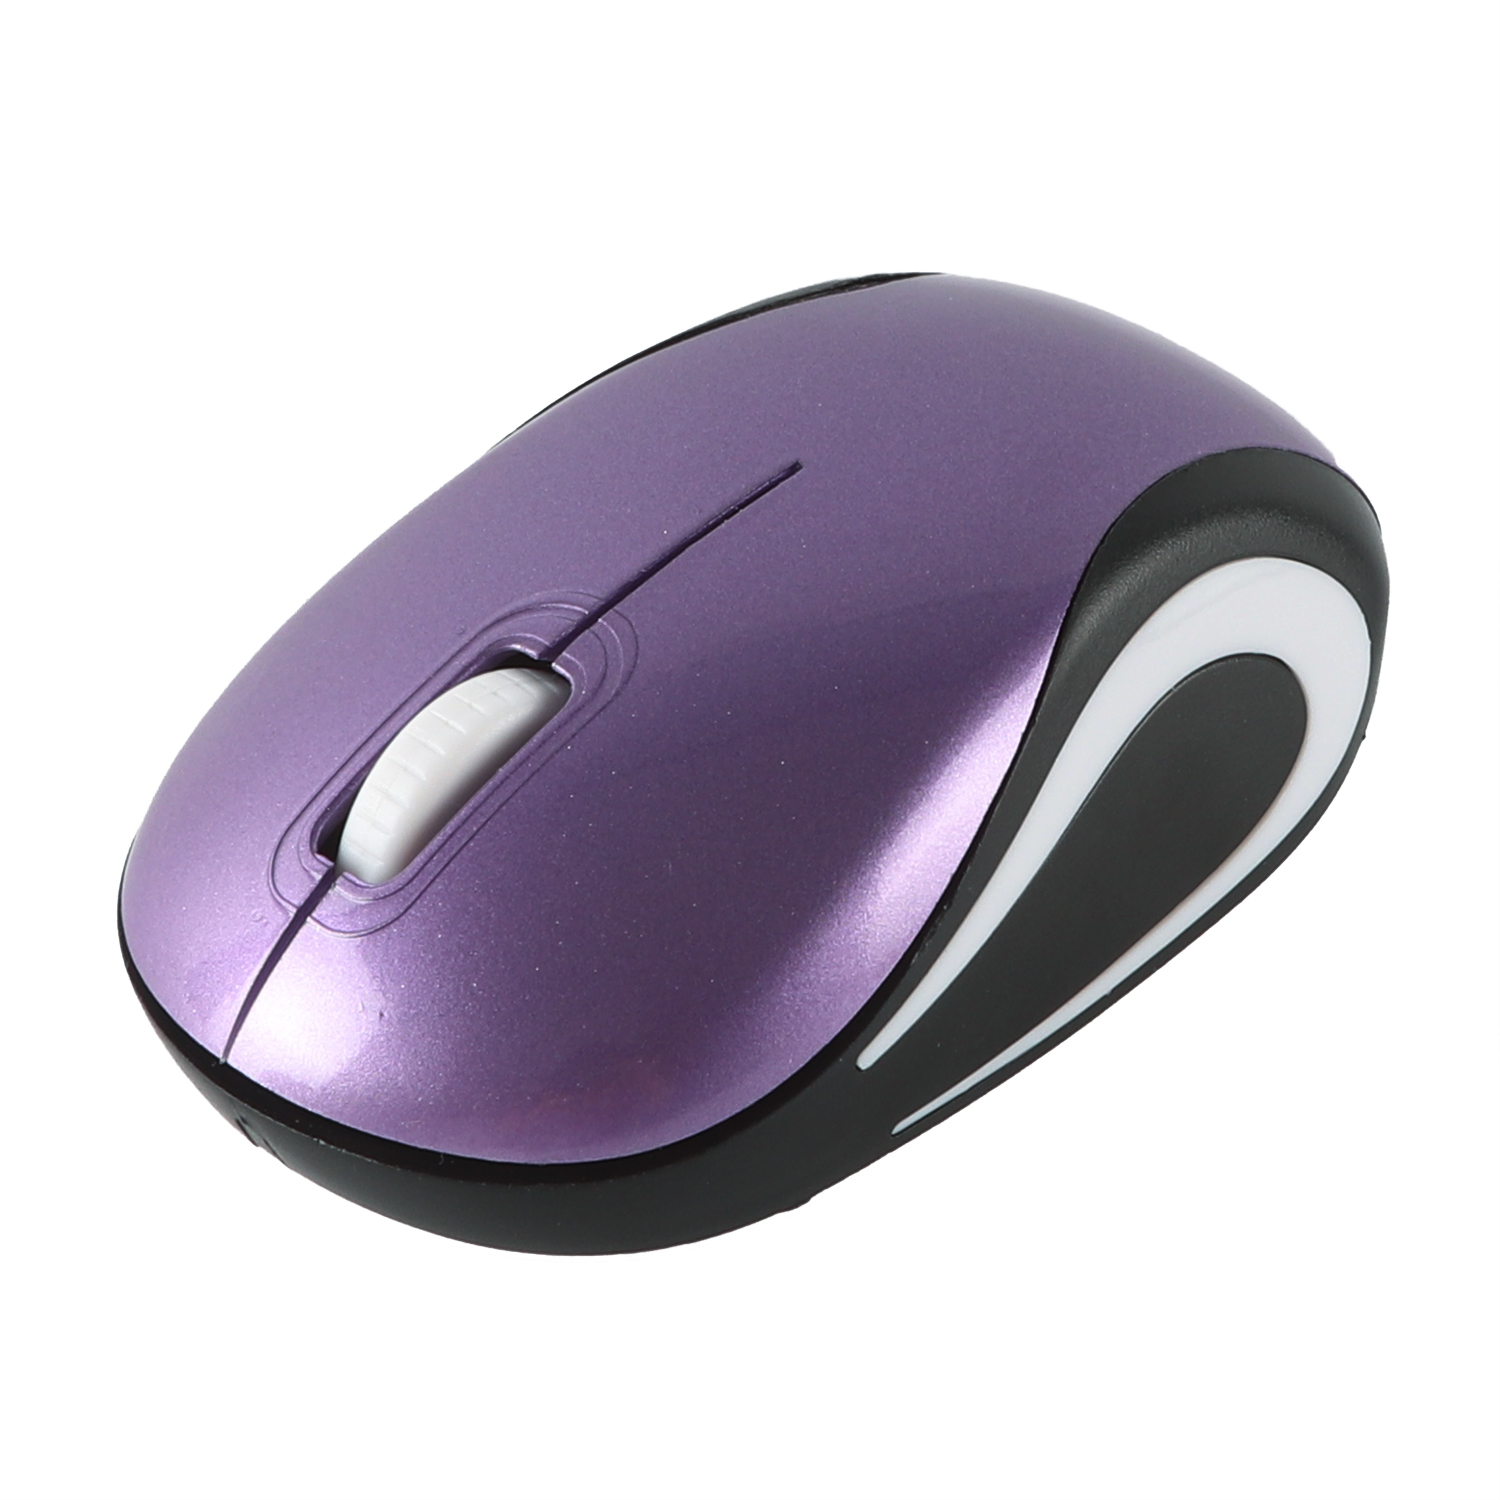 Mini-Wireless-mouse-for-Computer-2-4Ghz-Gaming-Small-Mause-1600-DPI-Optical-USB-Ergonomic-USB (6)